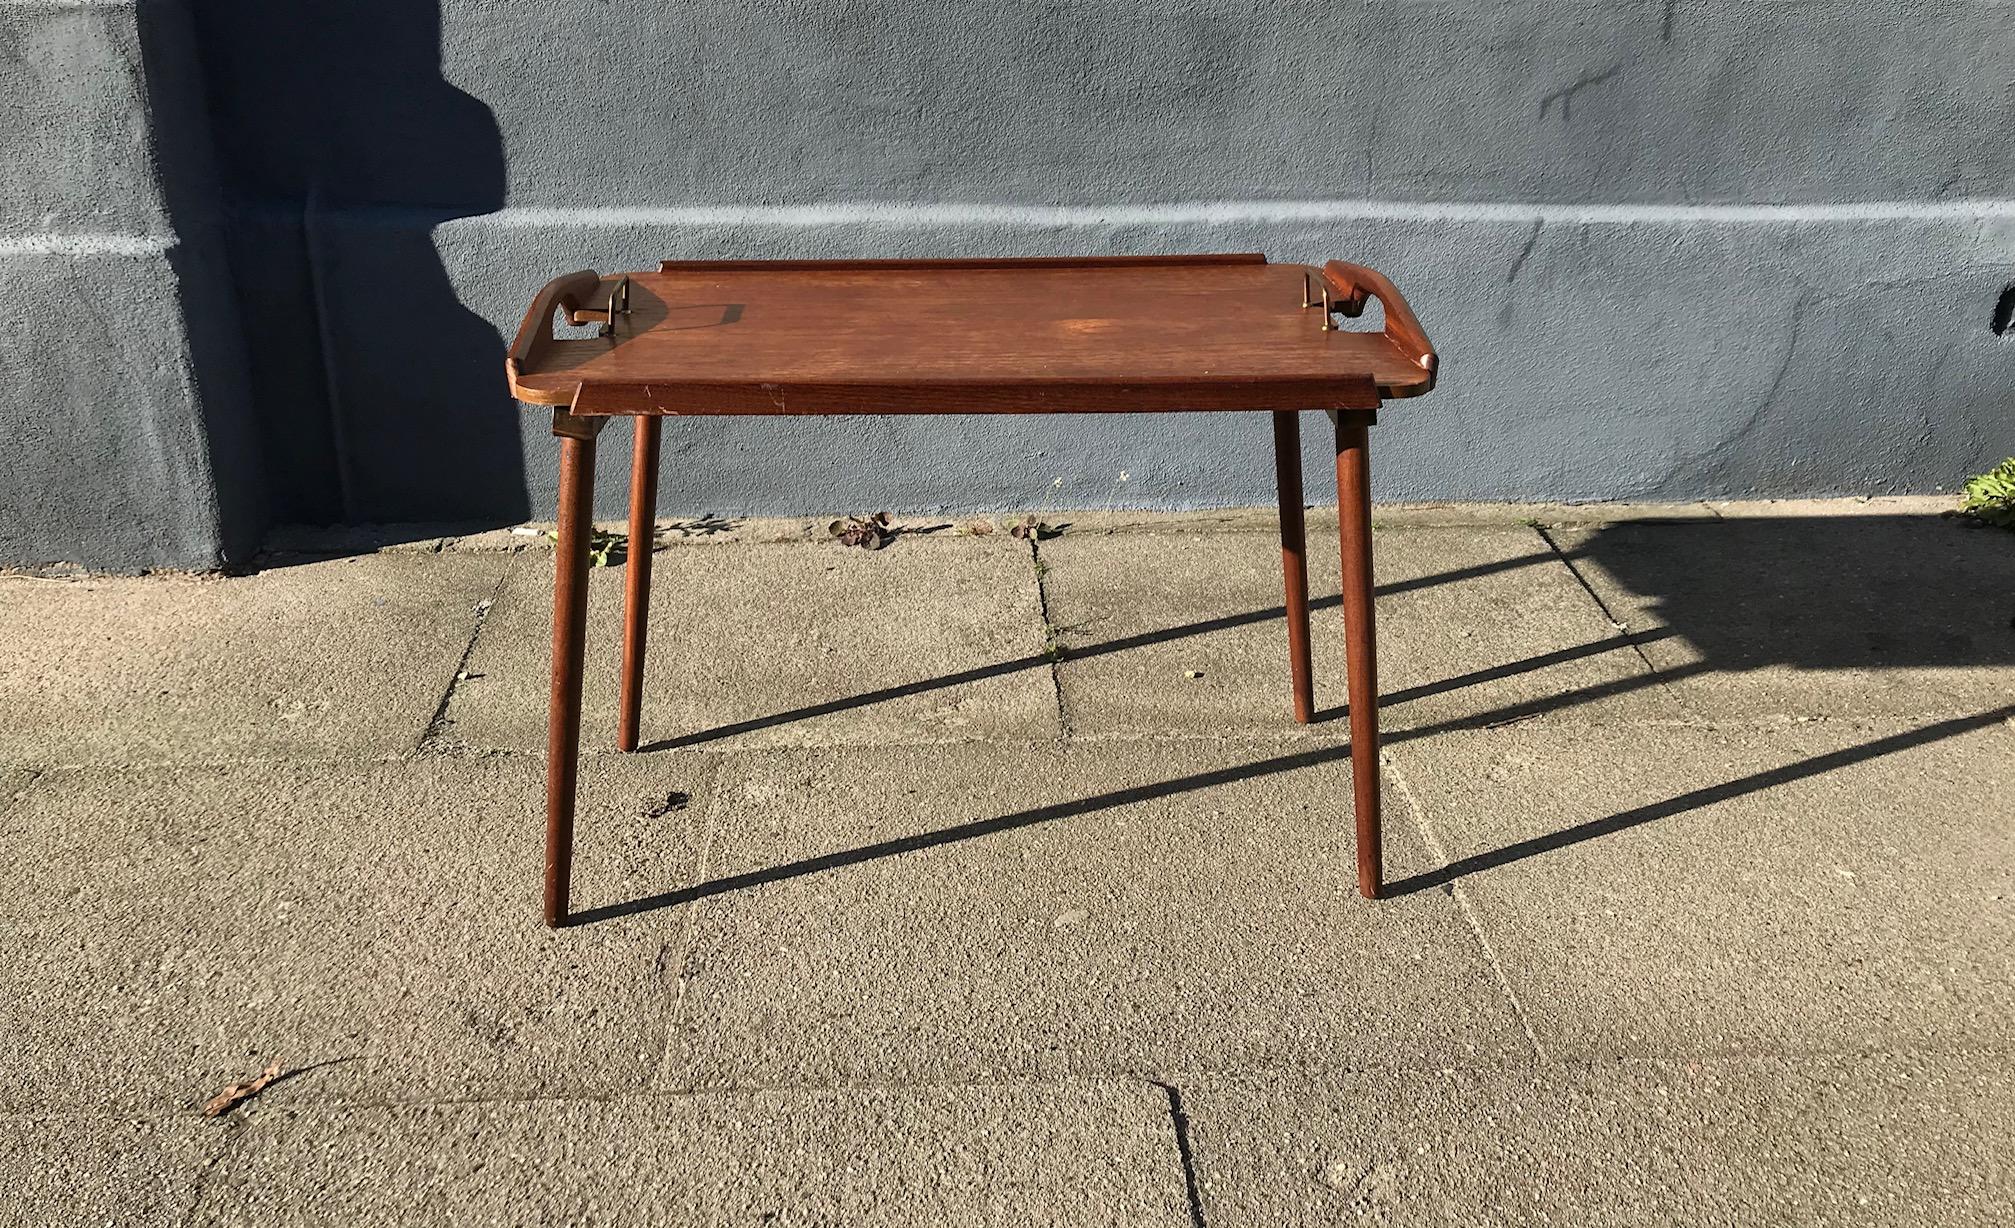 Midcentury Foldable Teak & Oak Tray Table by Bendt Winge for Aase, Norway, 1960 For Sale 1